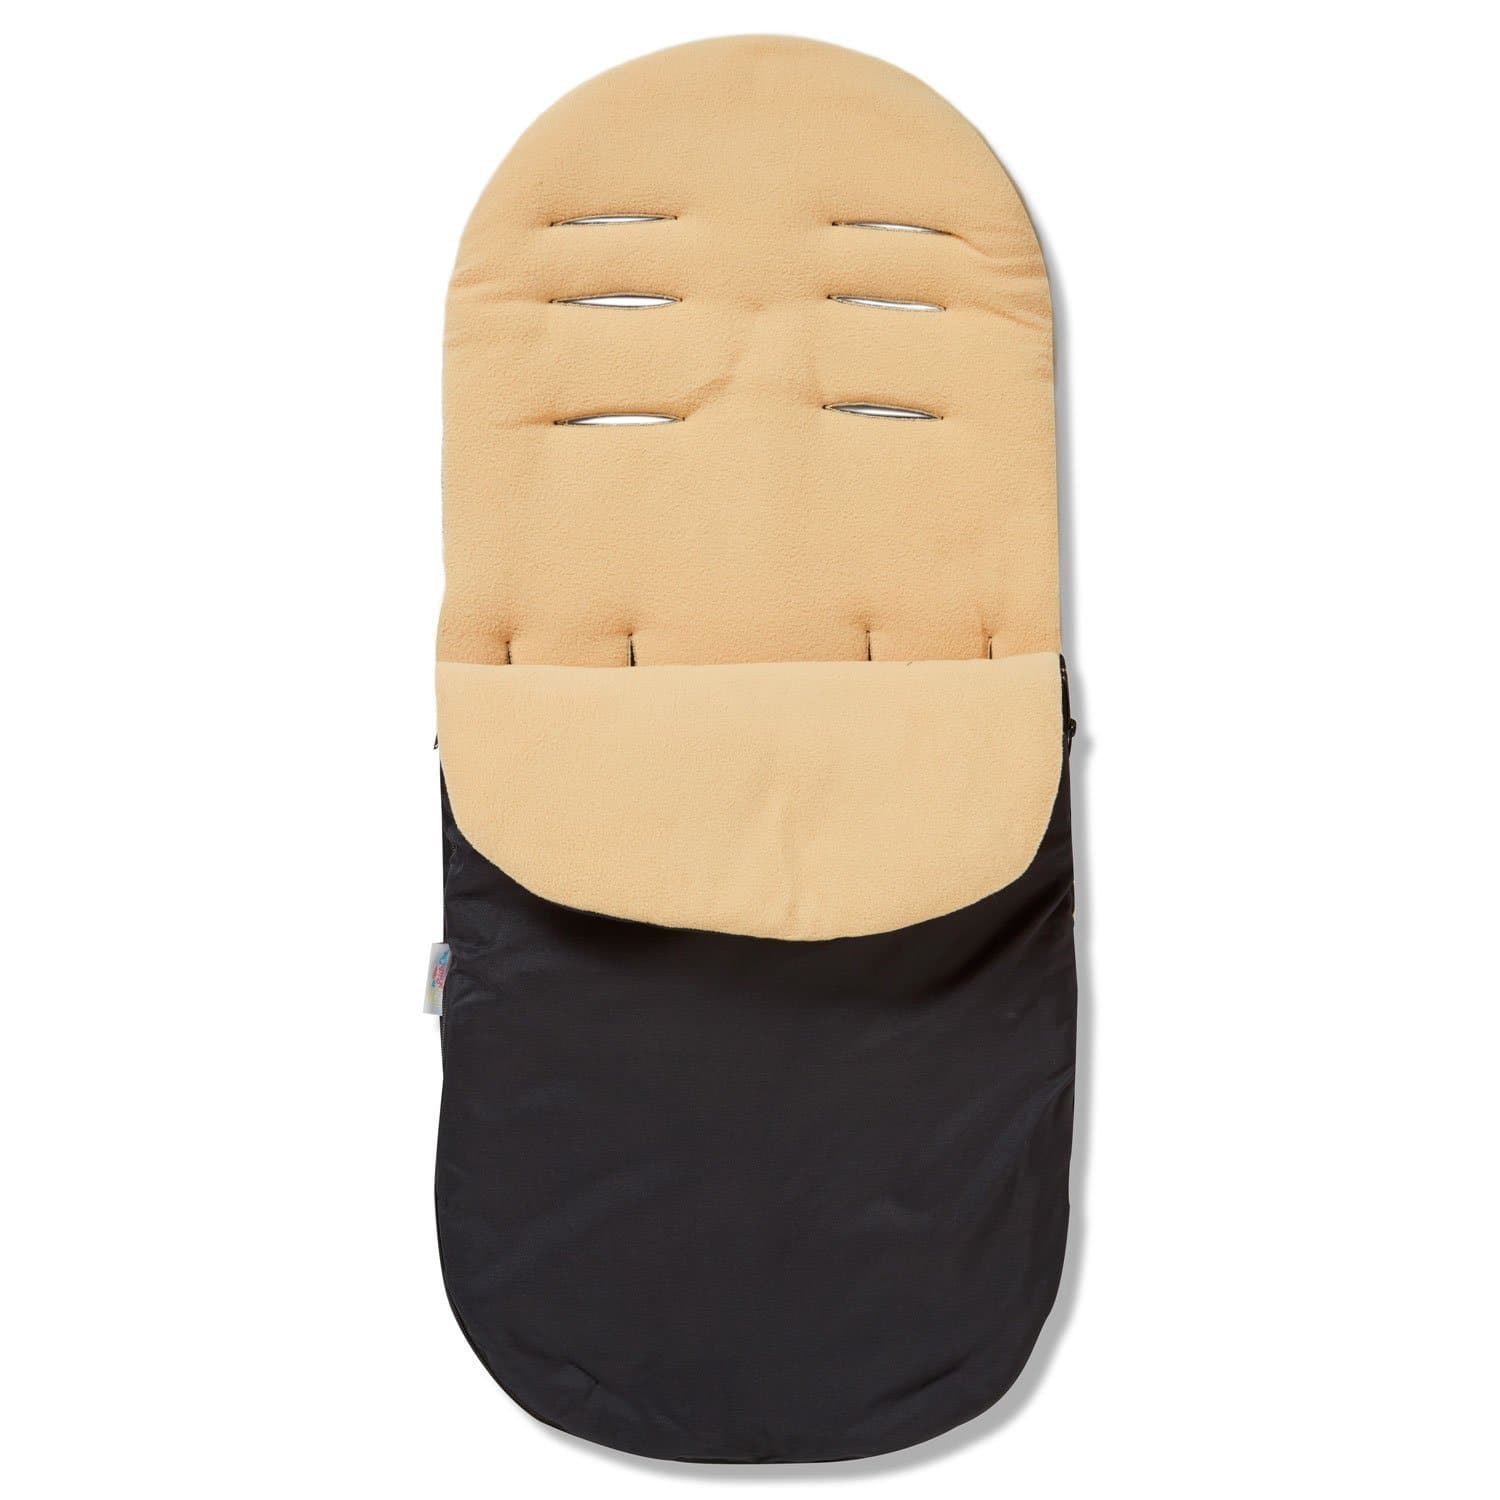 Footmuff / Cosy Toes Compatible with Uppababy - Sand / Fits All Models | For Your Little One